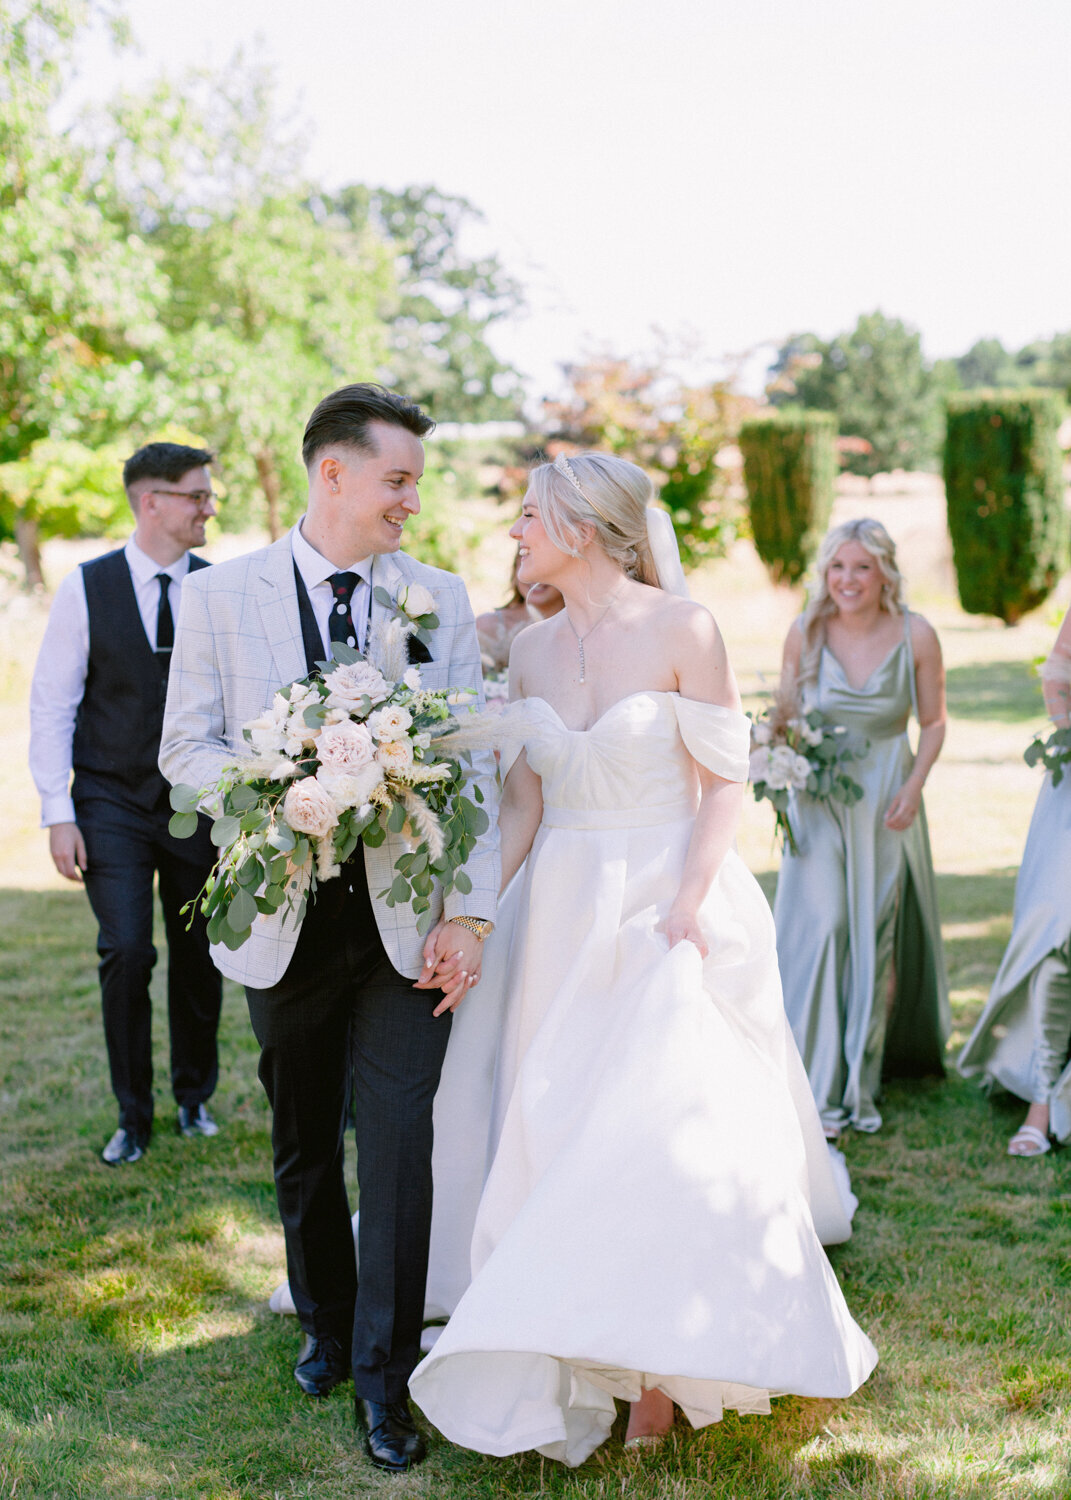 bride and groom walking next to each other with bridesmaids and groomsmen following behind